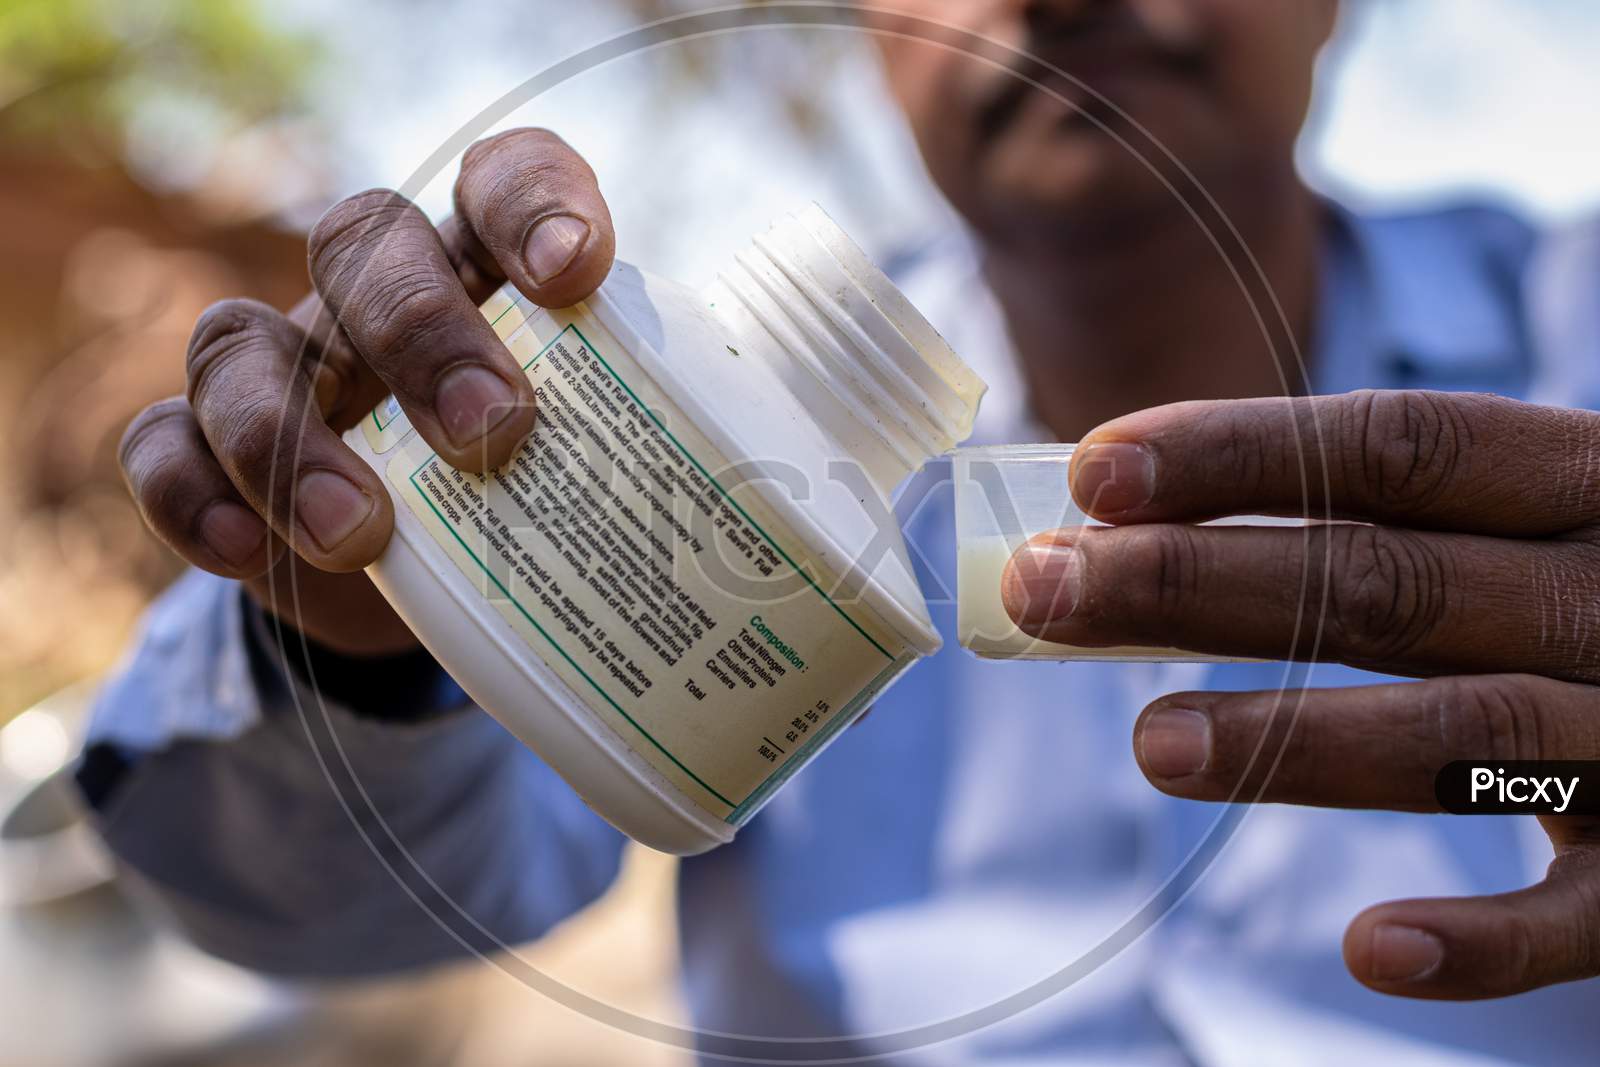 A farmer taking the pesticide into a measurement cup